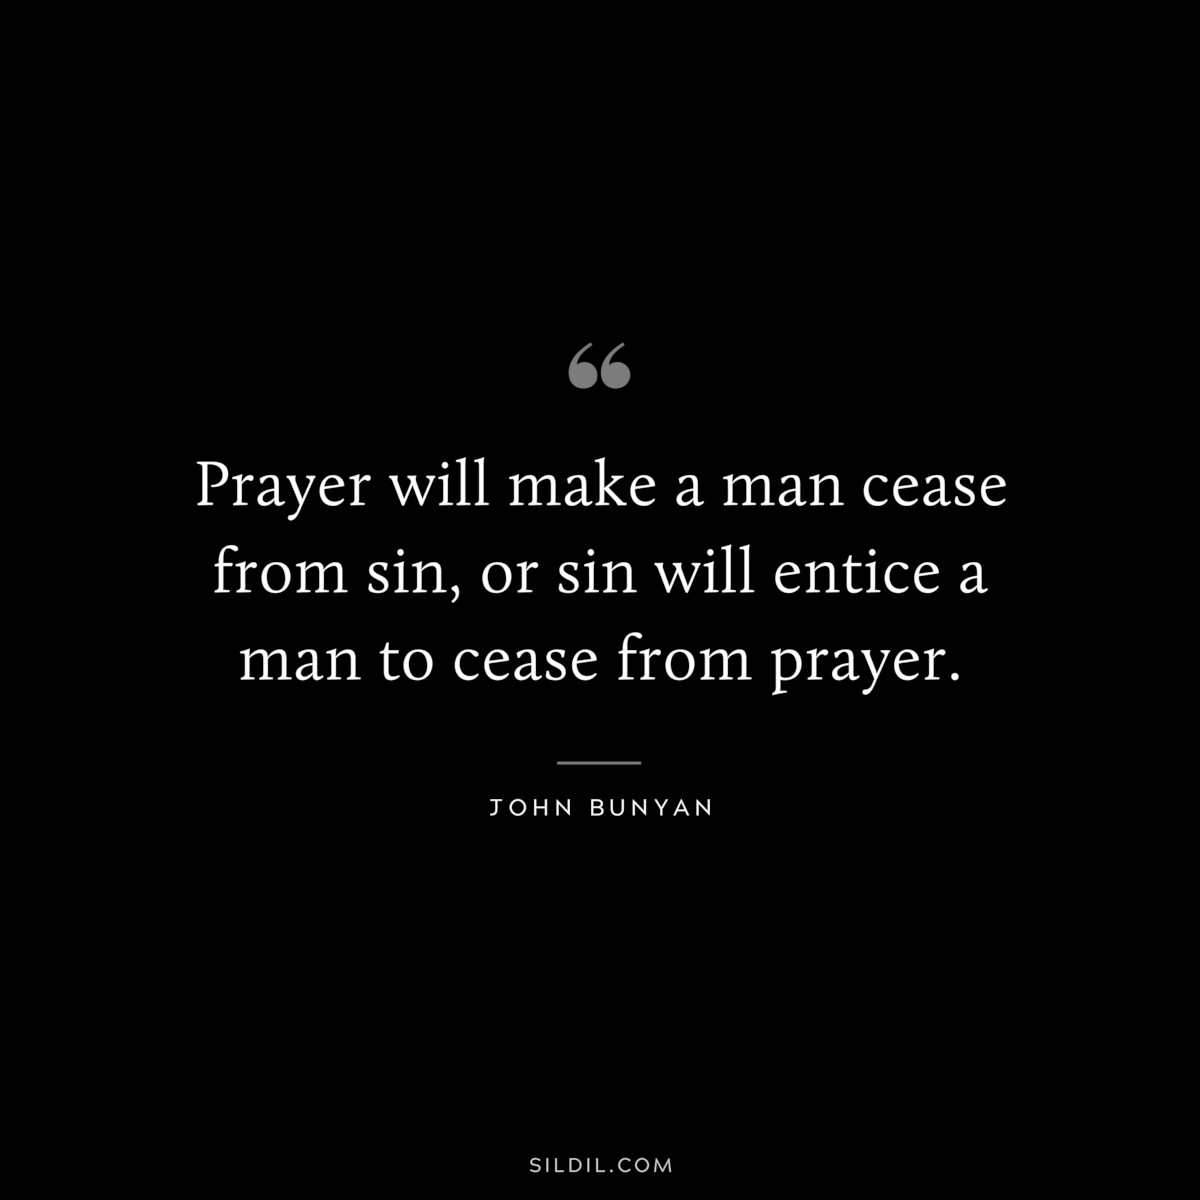 Prayer will make a man cease from sin, or sin will entice a man to cease from prayer. ― John Bunyan